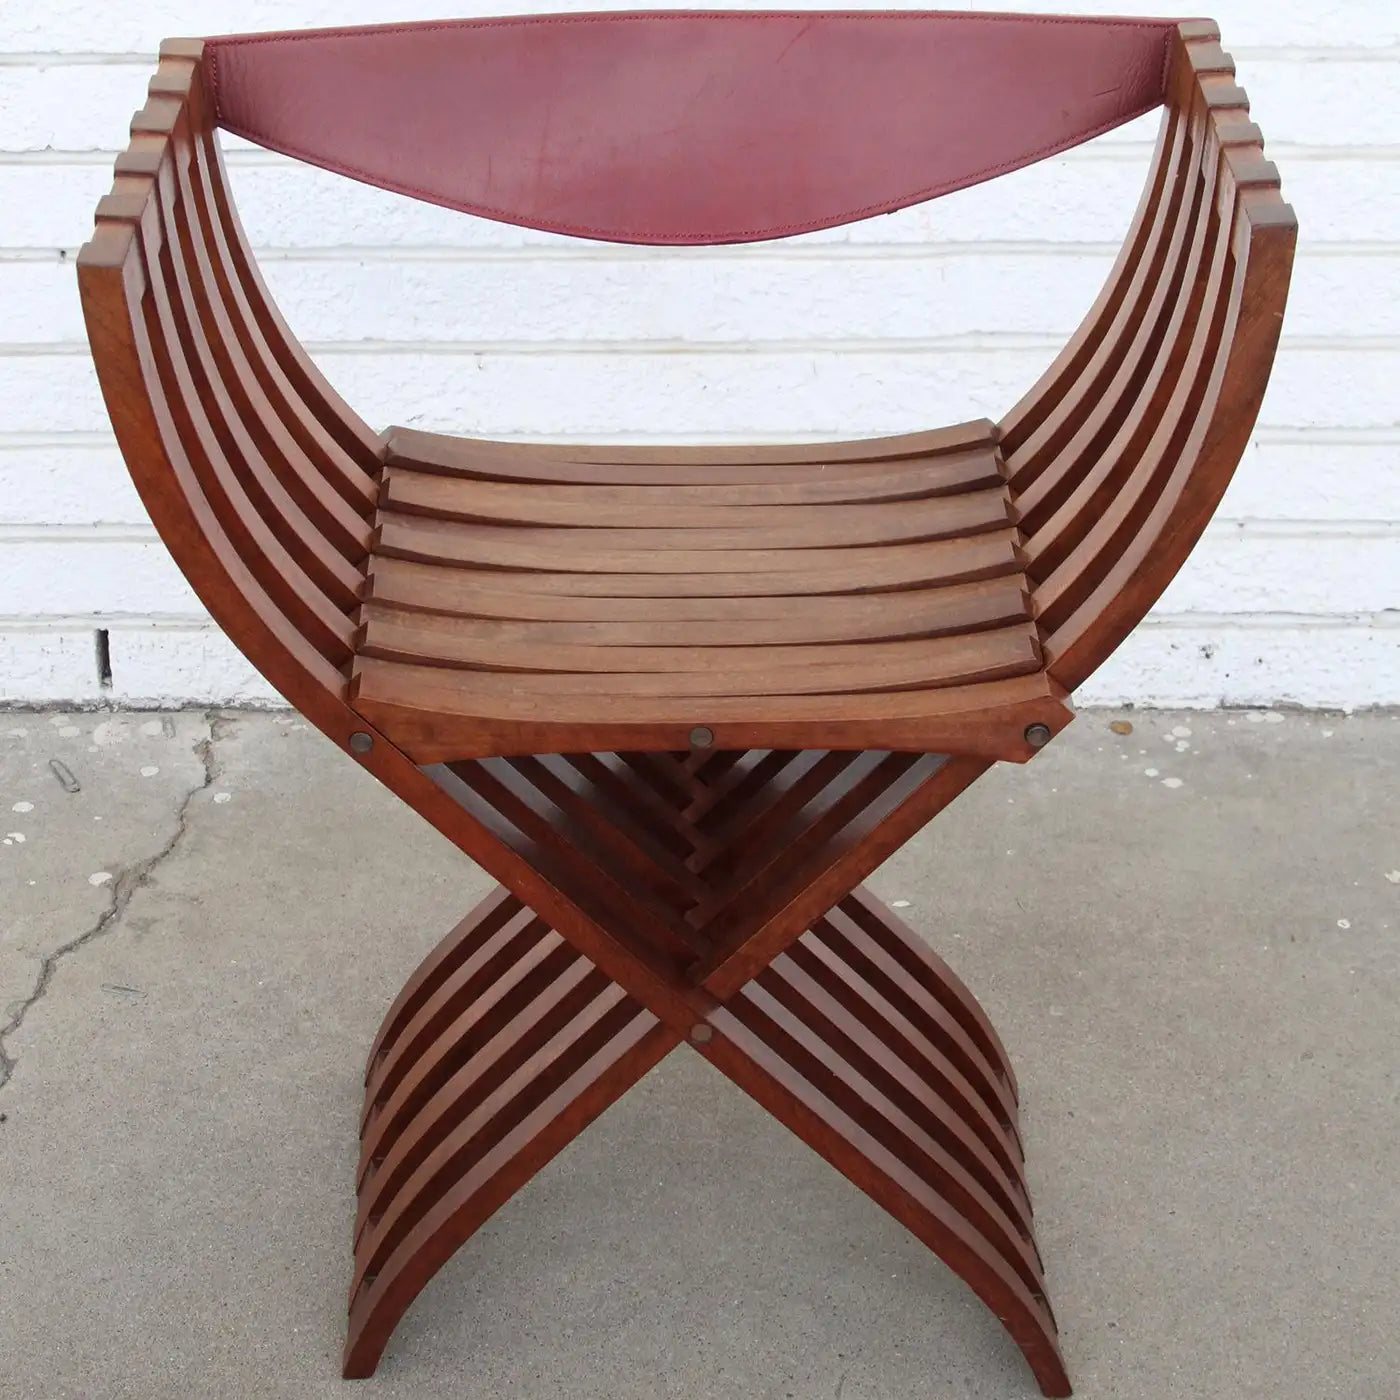 1 Curule Chair in the Style of Pierre Paulin